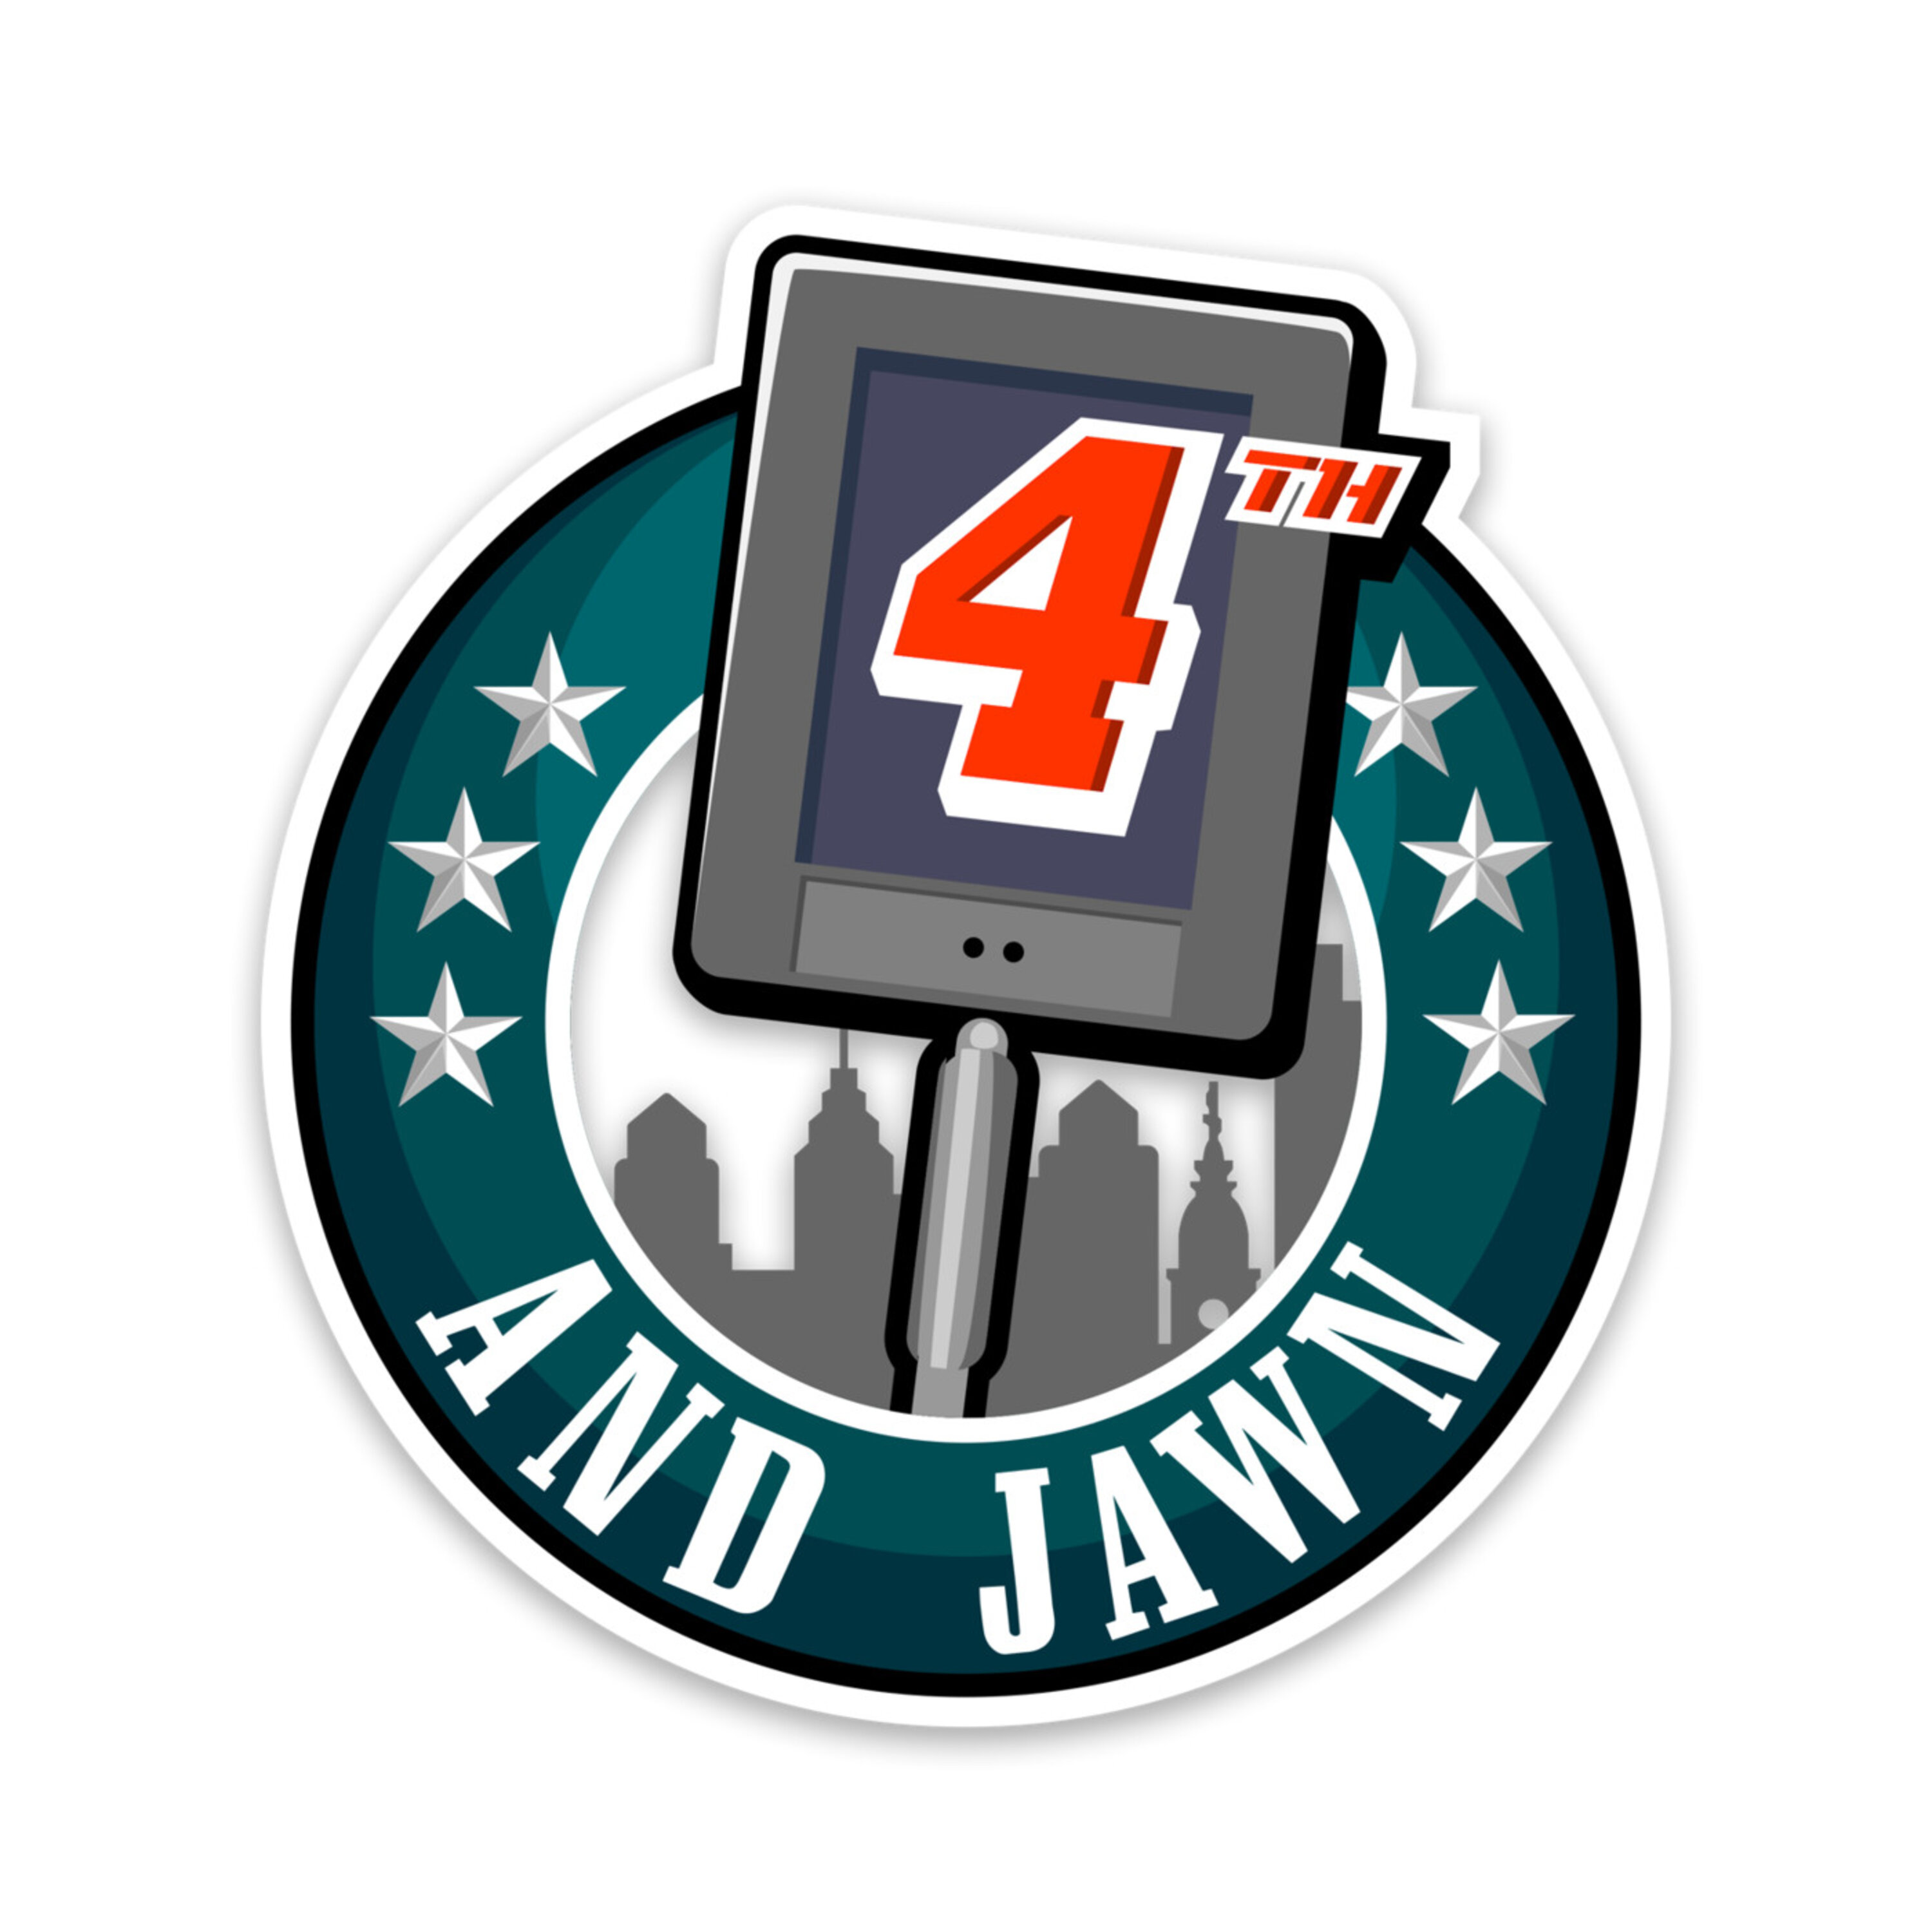 4th and Jawn - Episode 244 - Eagles vs. Broncos Preview with Steve O'Reilly